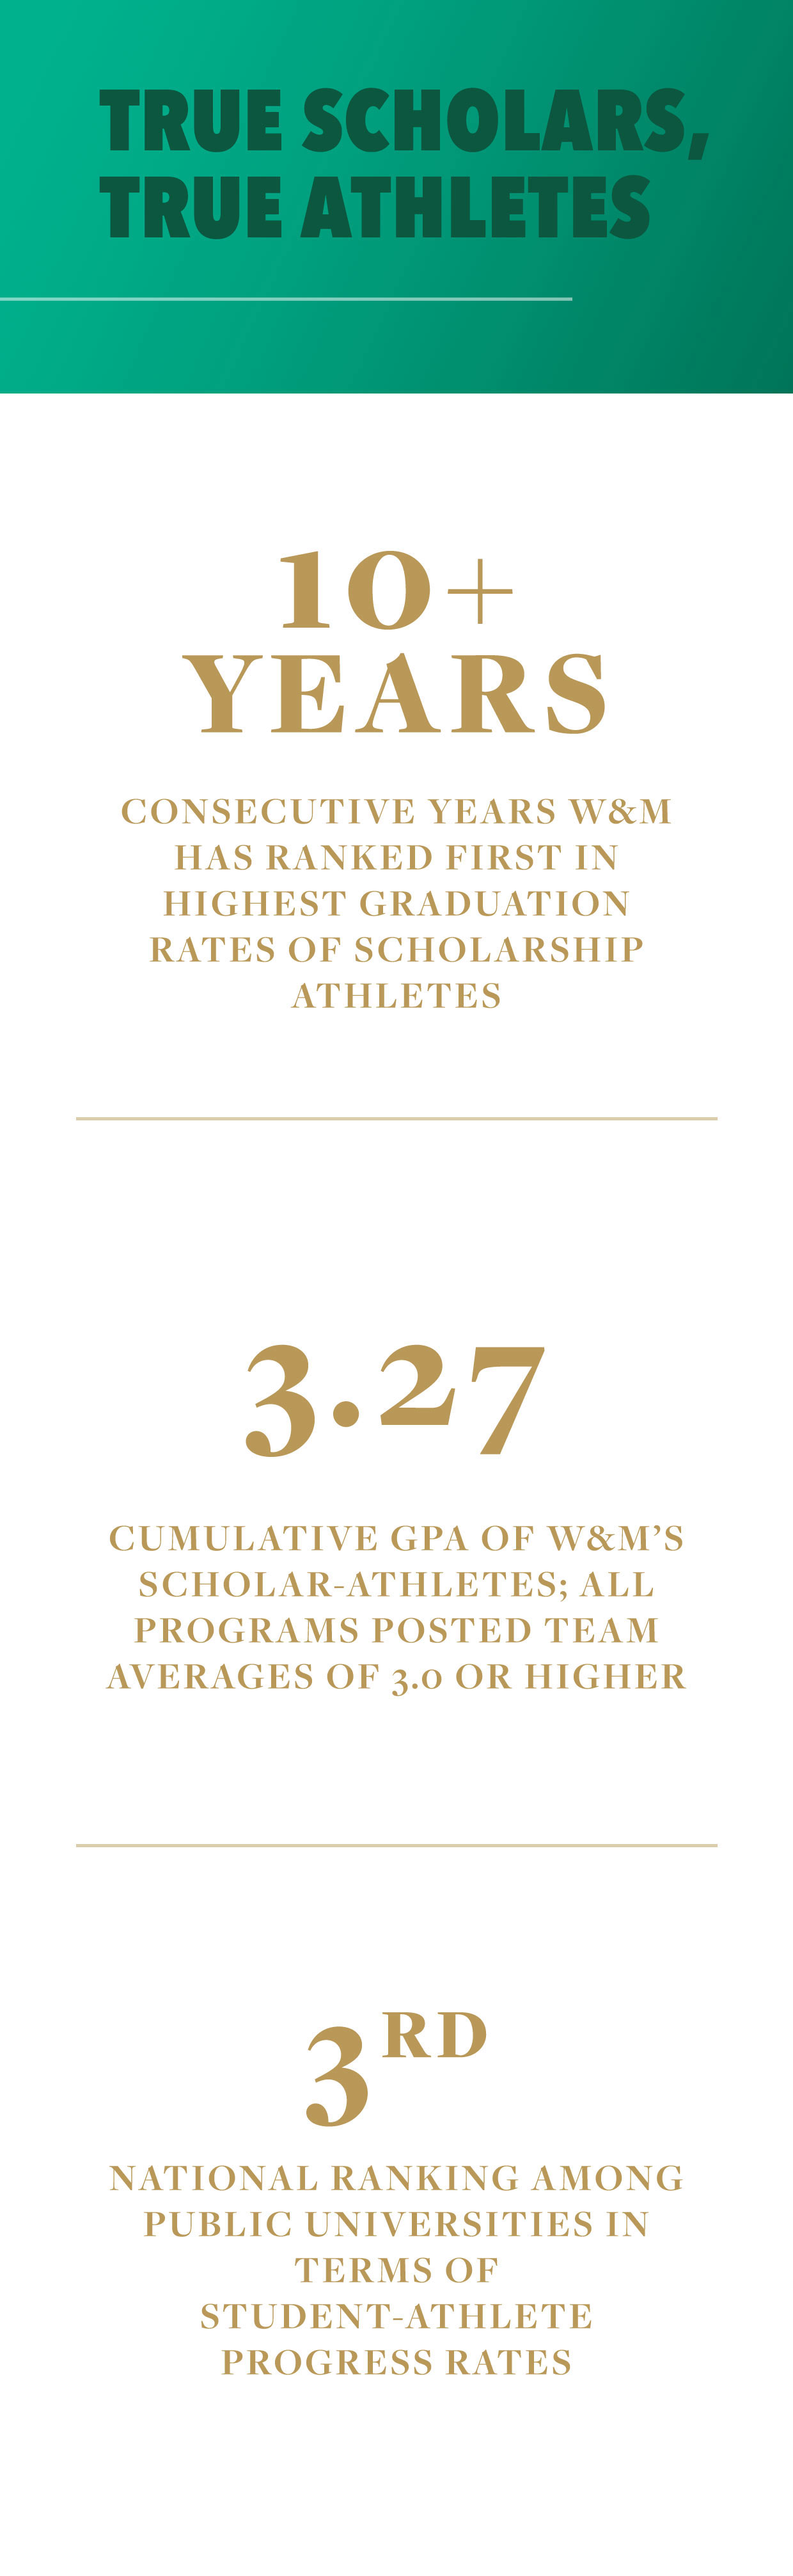 True scholars, true athletes. 10+ Years: consecutive years W&M has ranked first in highest graduation rates of scholarship athletes. 3.27 cumulative GPA of W&M's scholar athletes: all programs posted team averages of 3.0 or higher. 3rd national ranking among public universities in terms of student athlete progress rates.